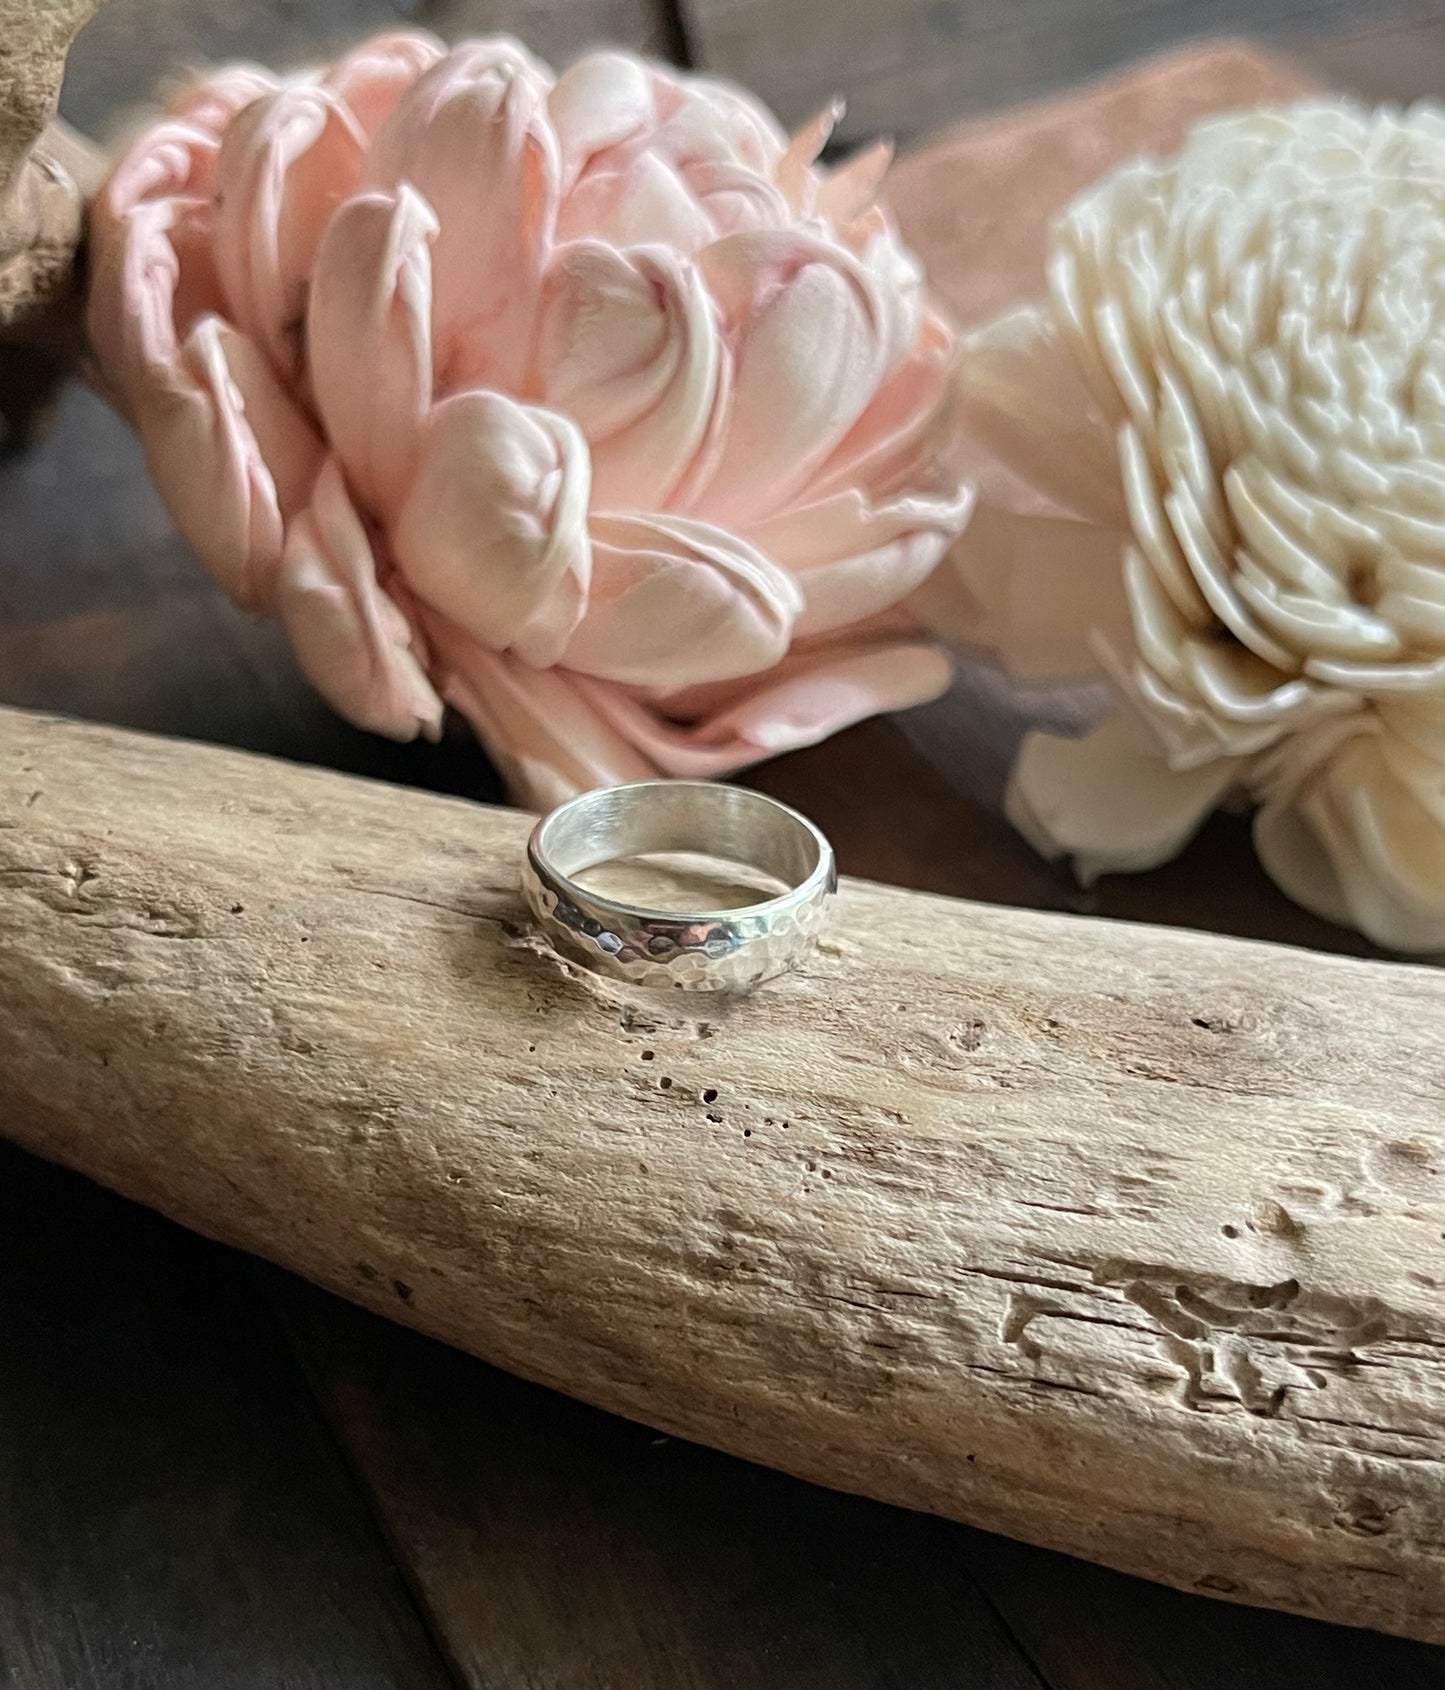 Hammered Sterling Silver Ring